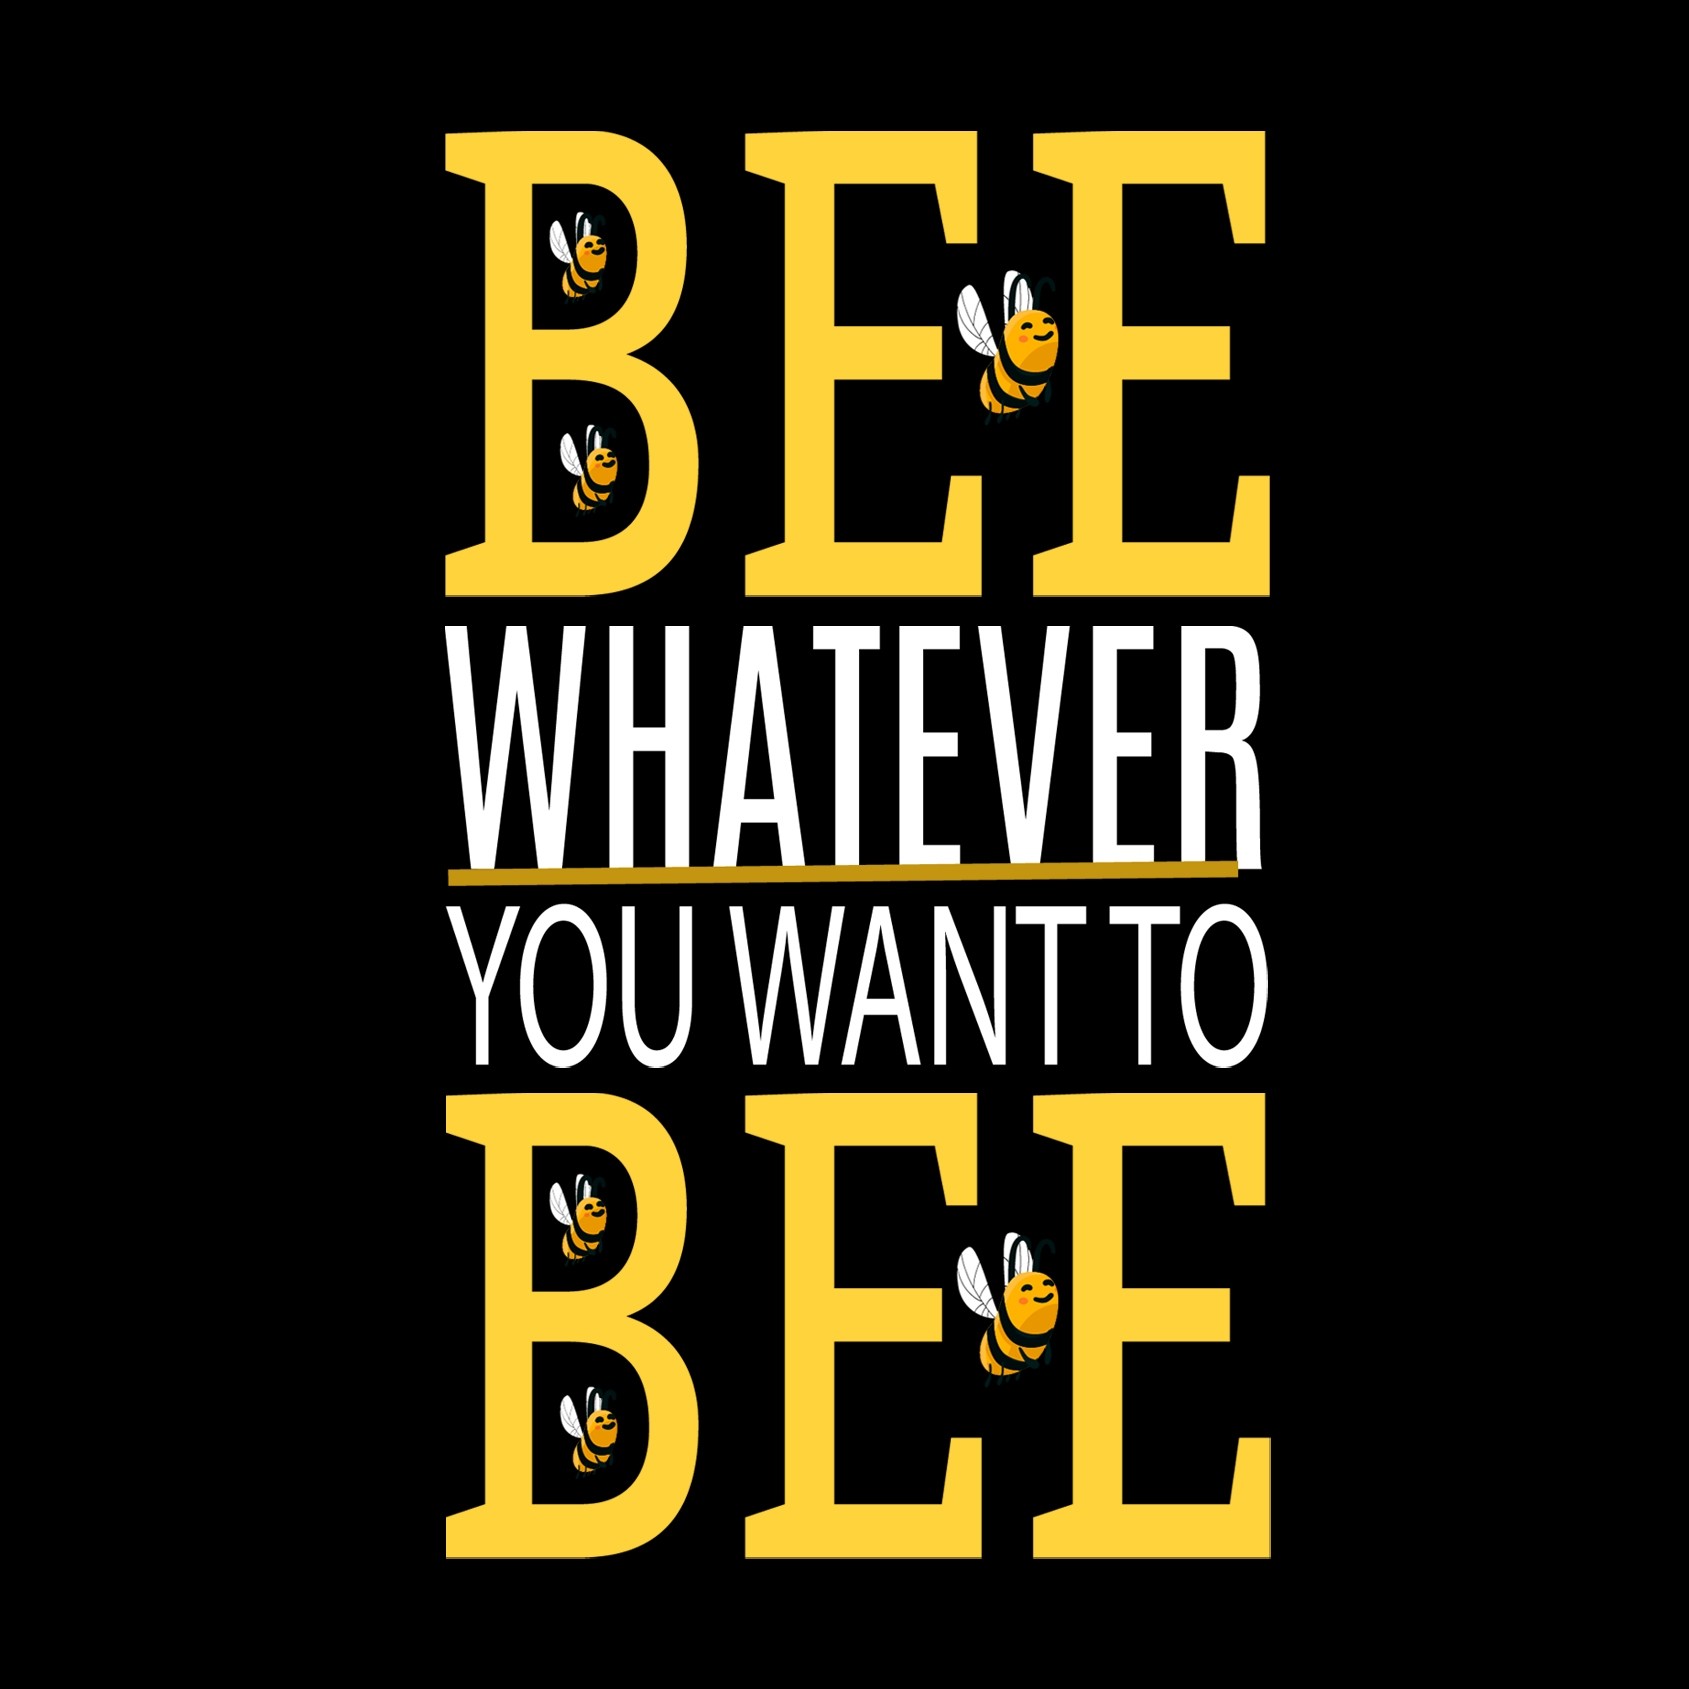 Inspirational Motivational Greeting Card (Bee Whatever)